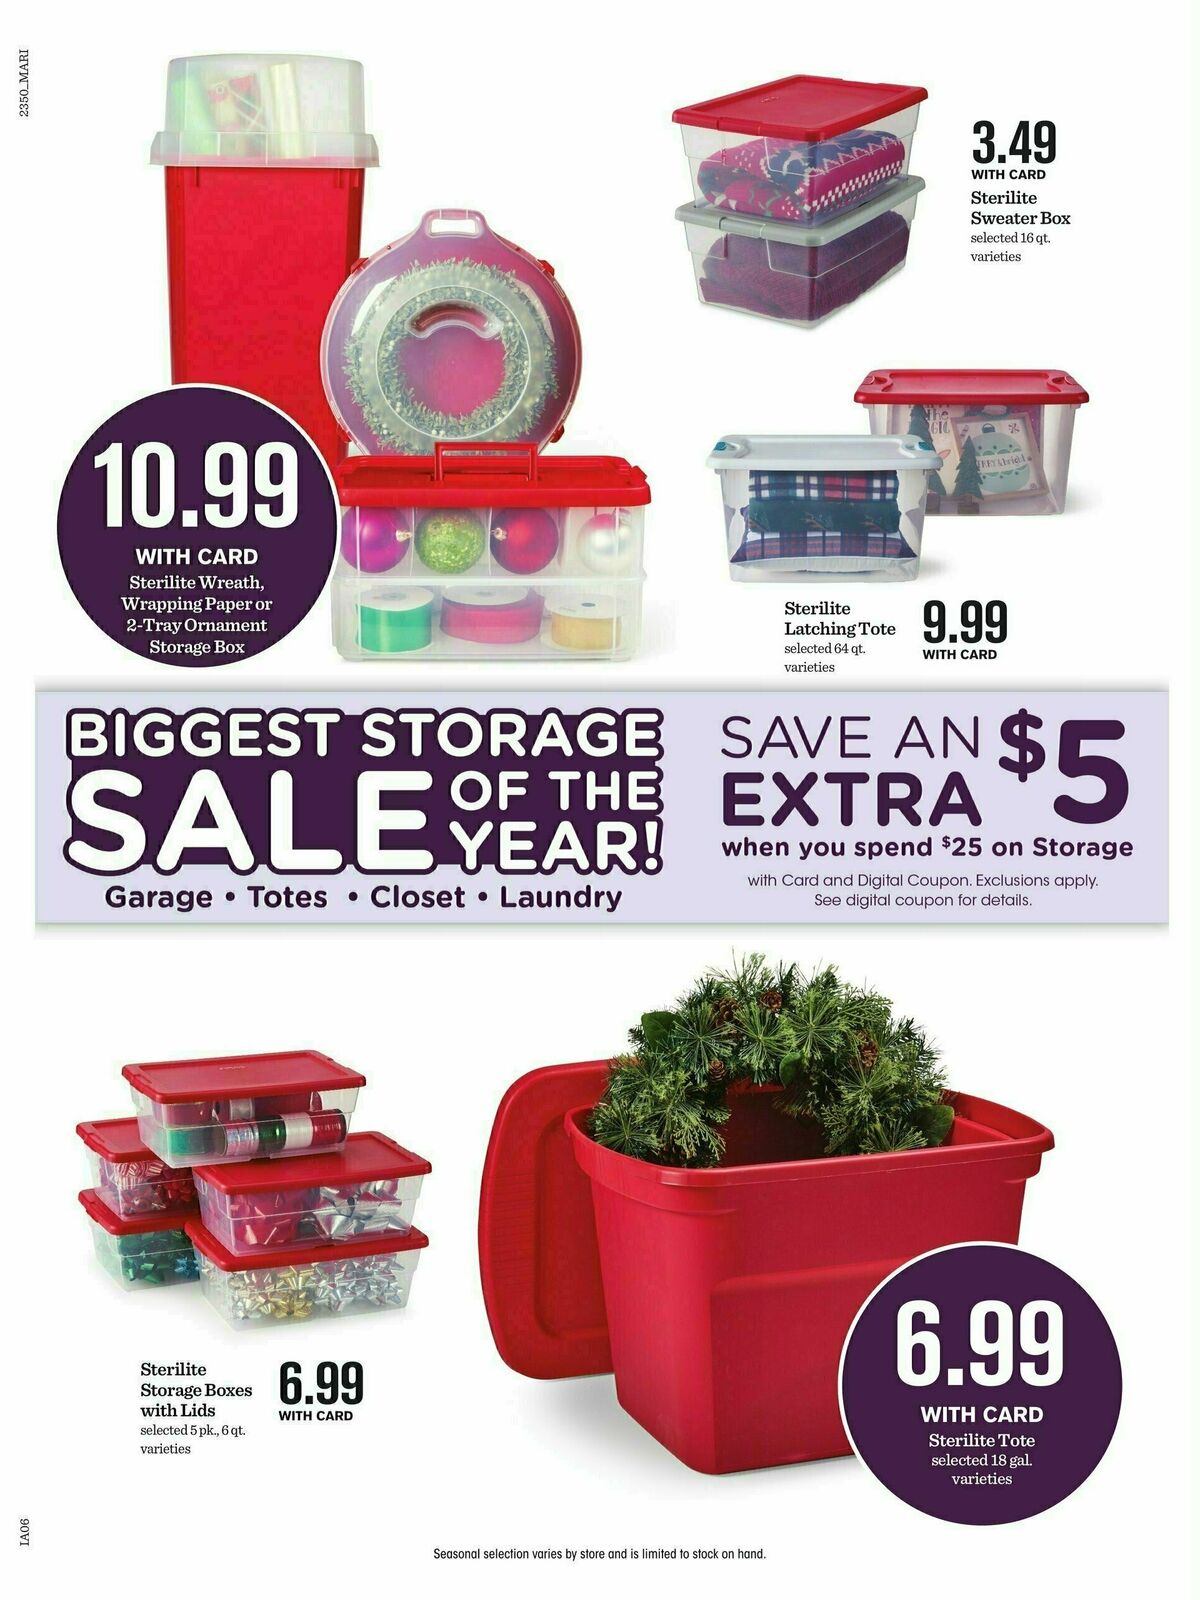 Mariano's Weekly Ad from January 10